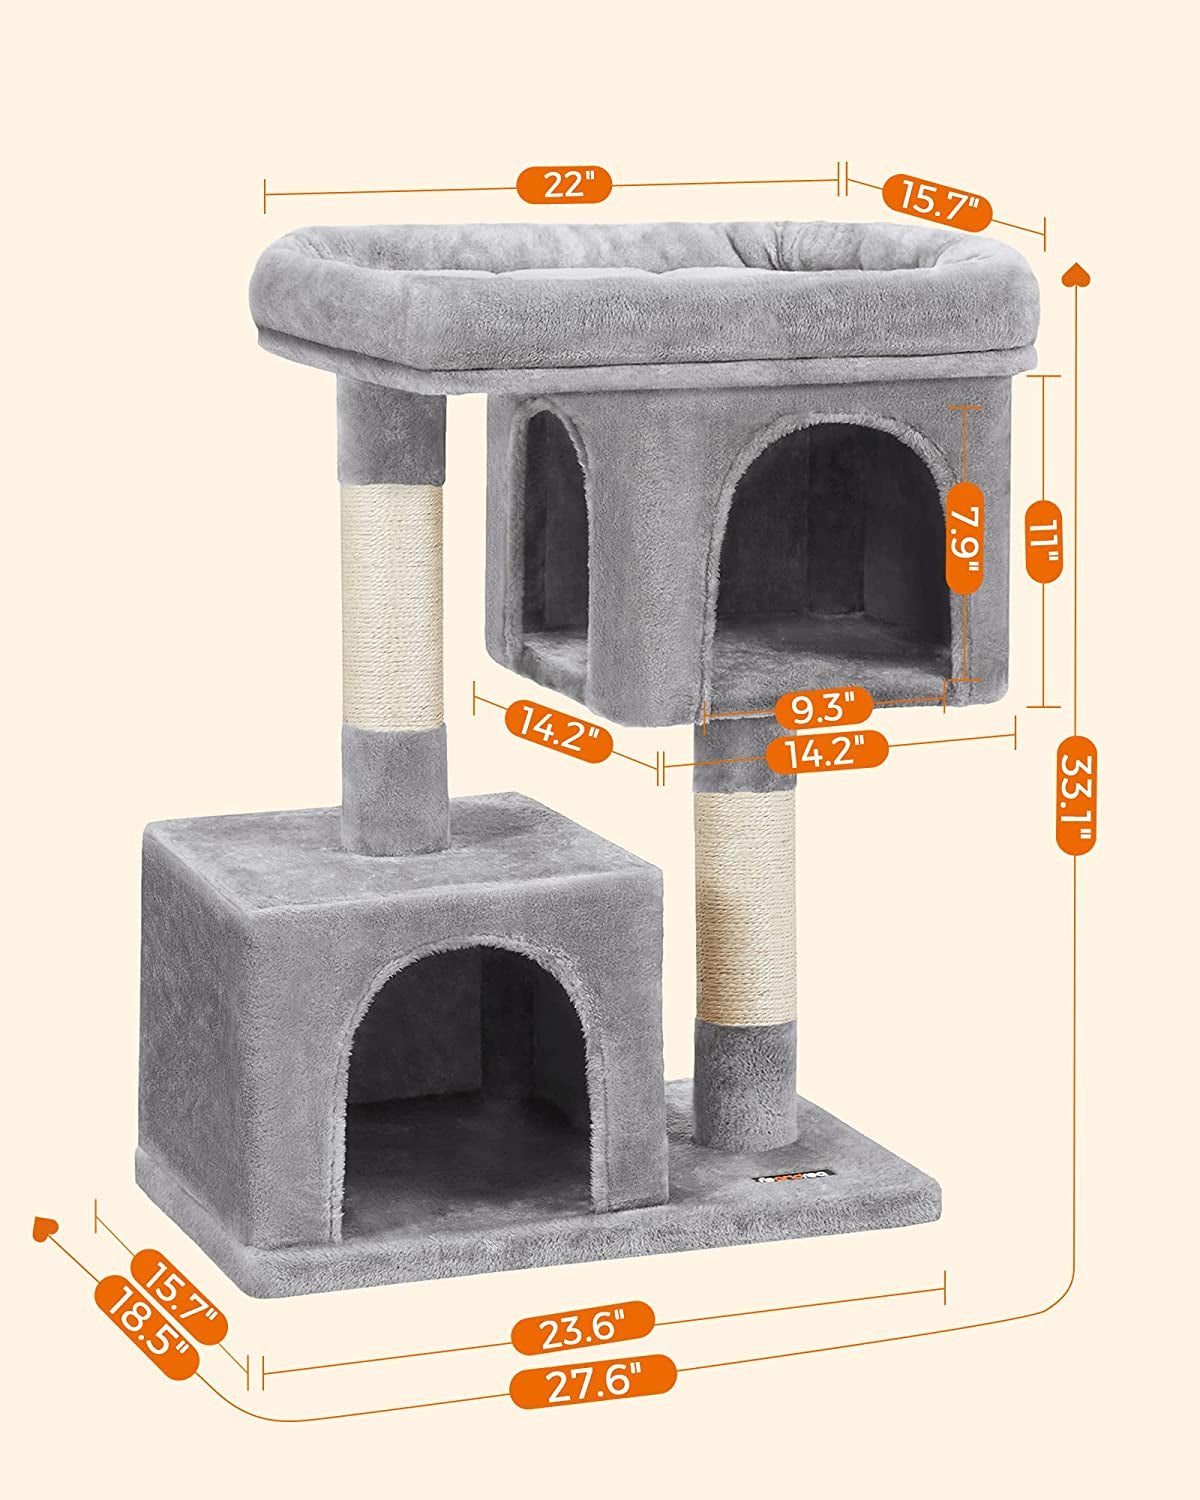 Cat Tree, 33.1-Inch Cat Tower, L, Cat Condo for Large Cats up to 16 Lb, Large Cat Perch, 2 Cat Caves, Scratching Post, Light Gray UPCT61W